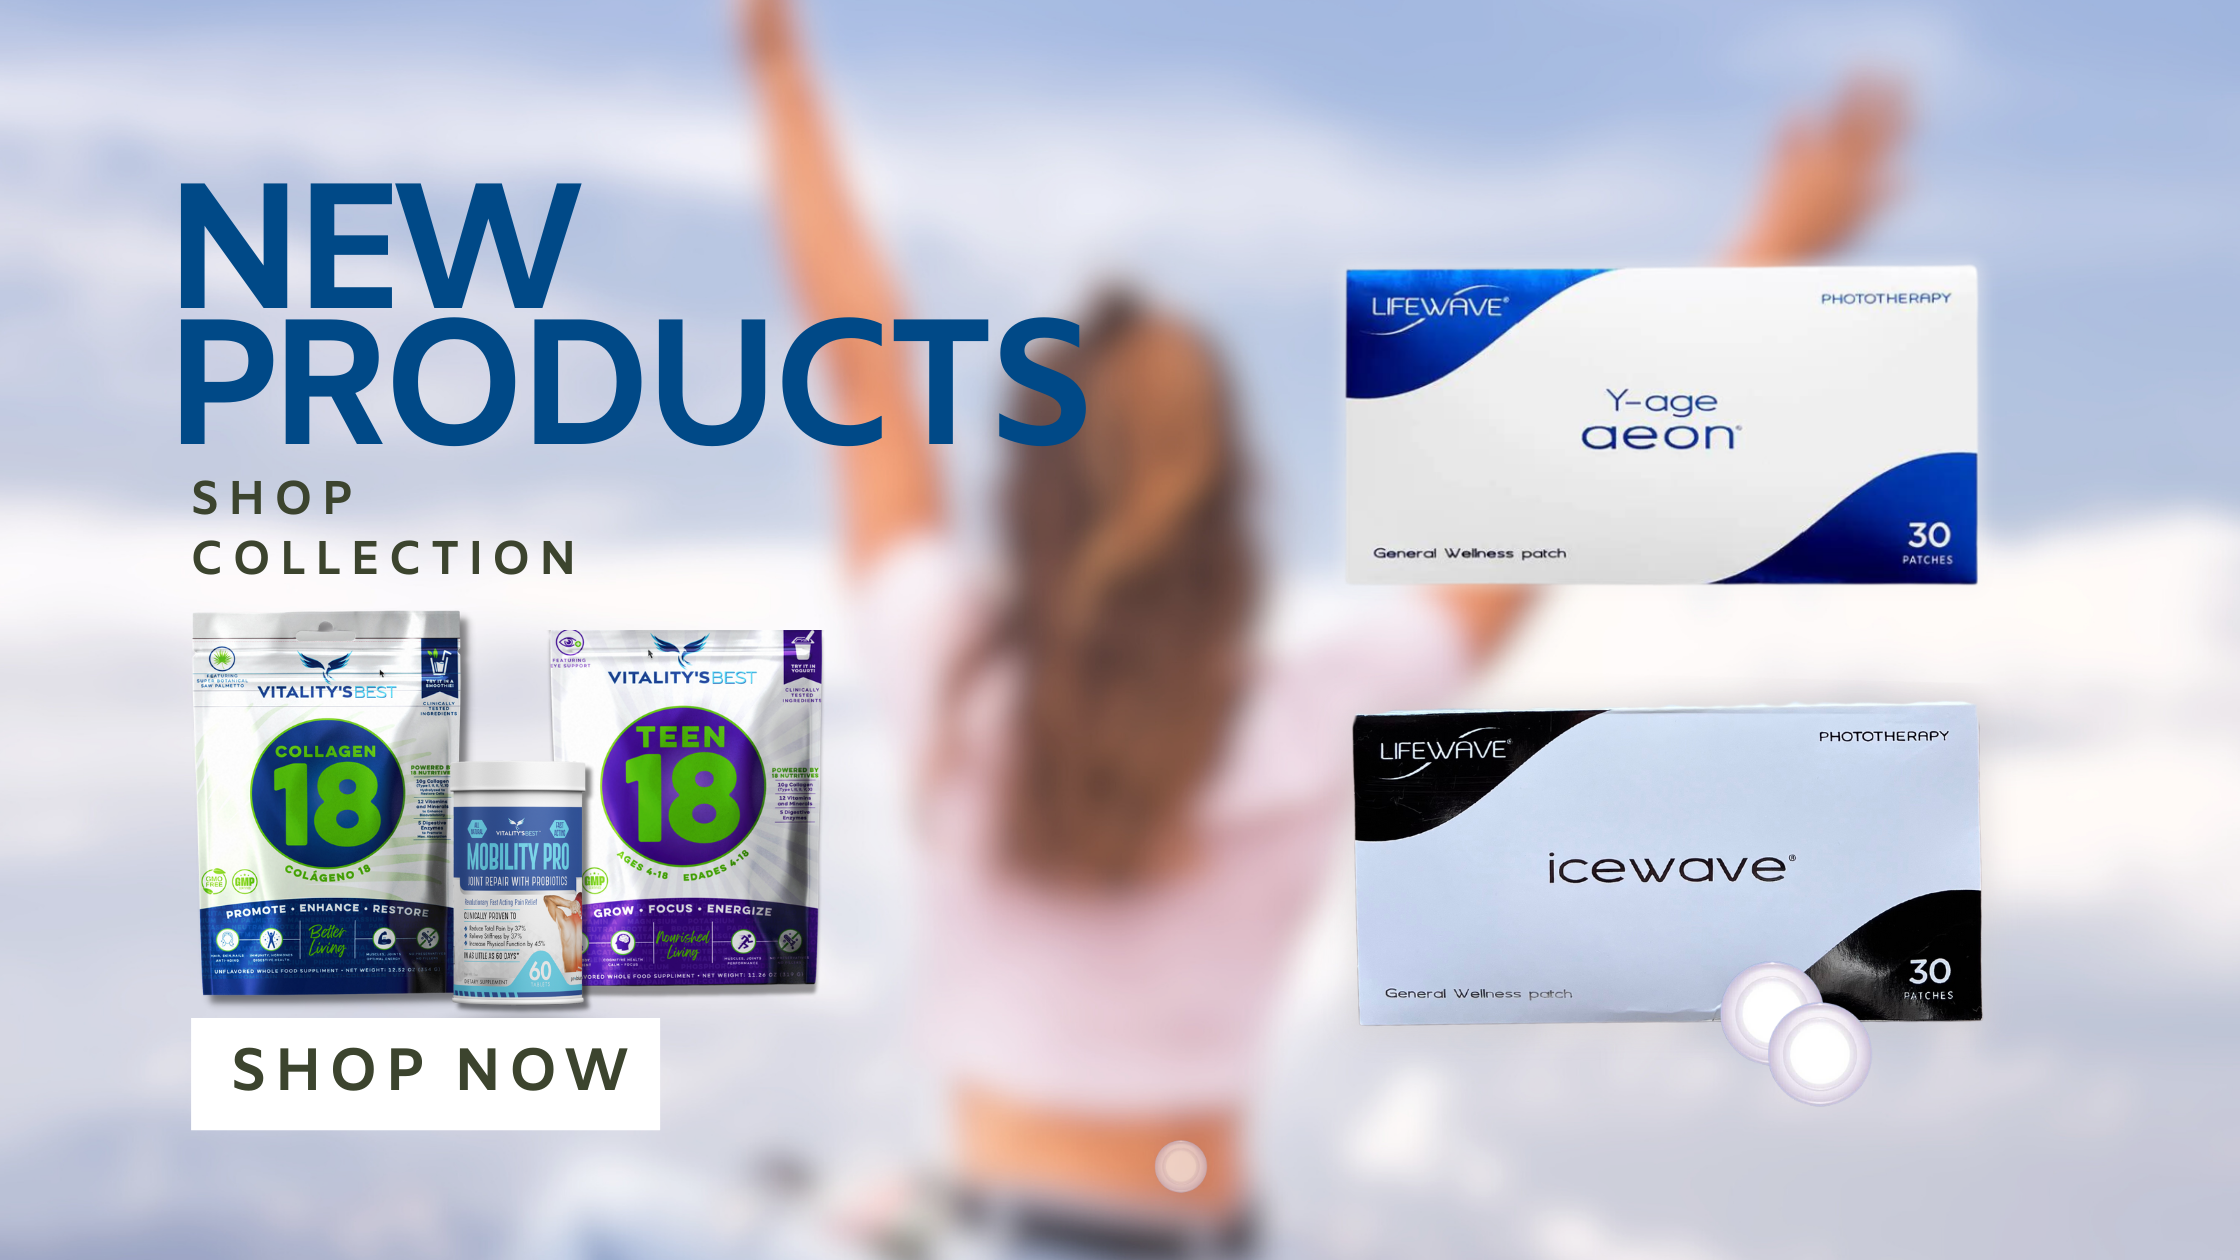 Lifewave Stem Cell Patches featuring Icewave Pain relief and Y age Aeon. Phototherapy 